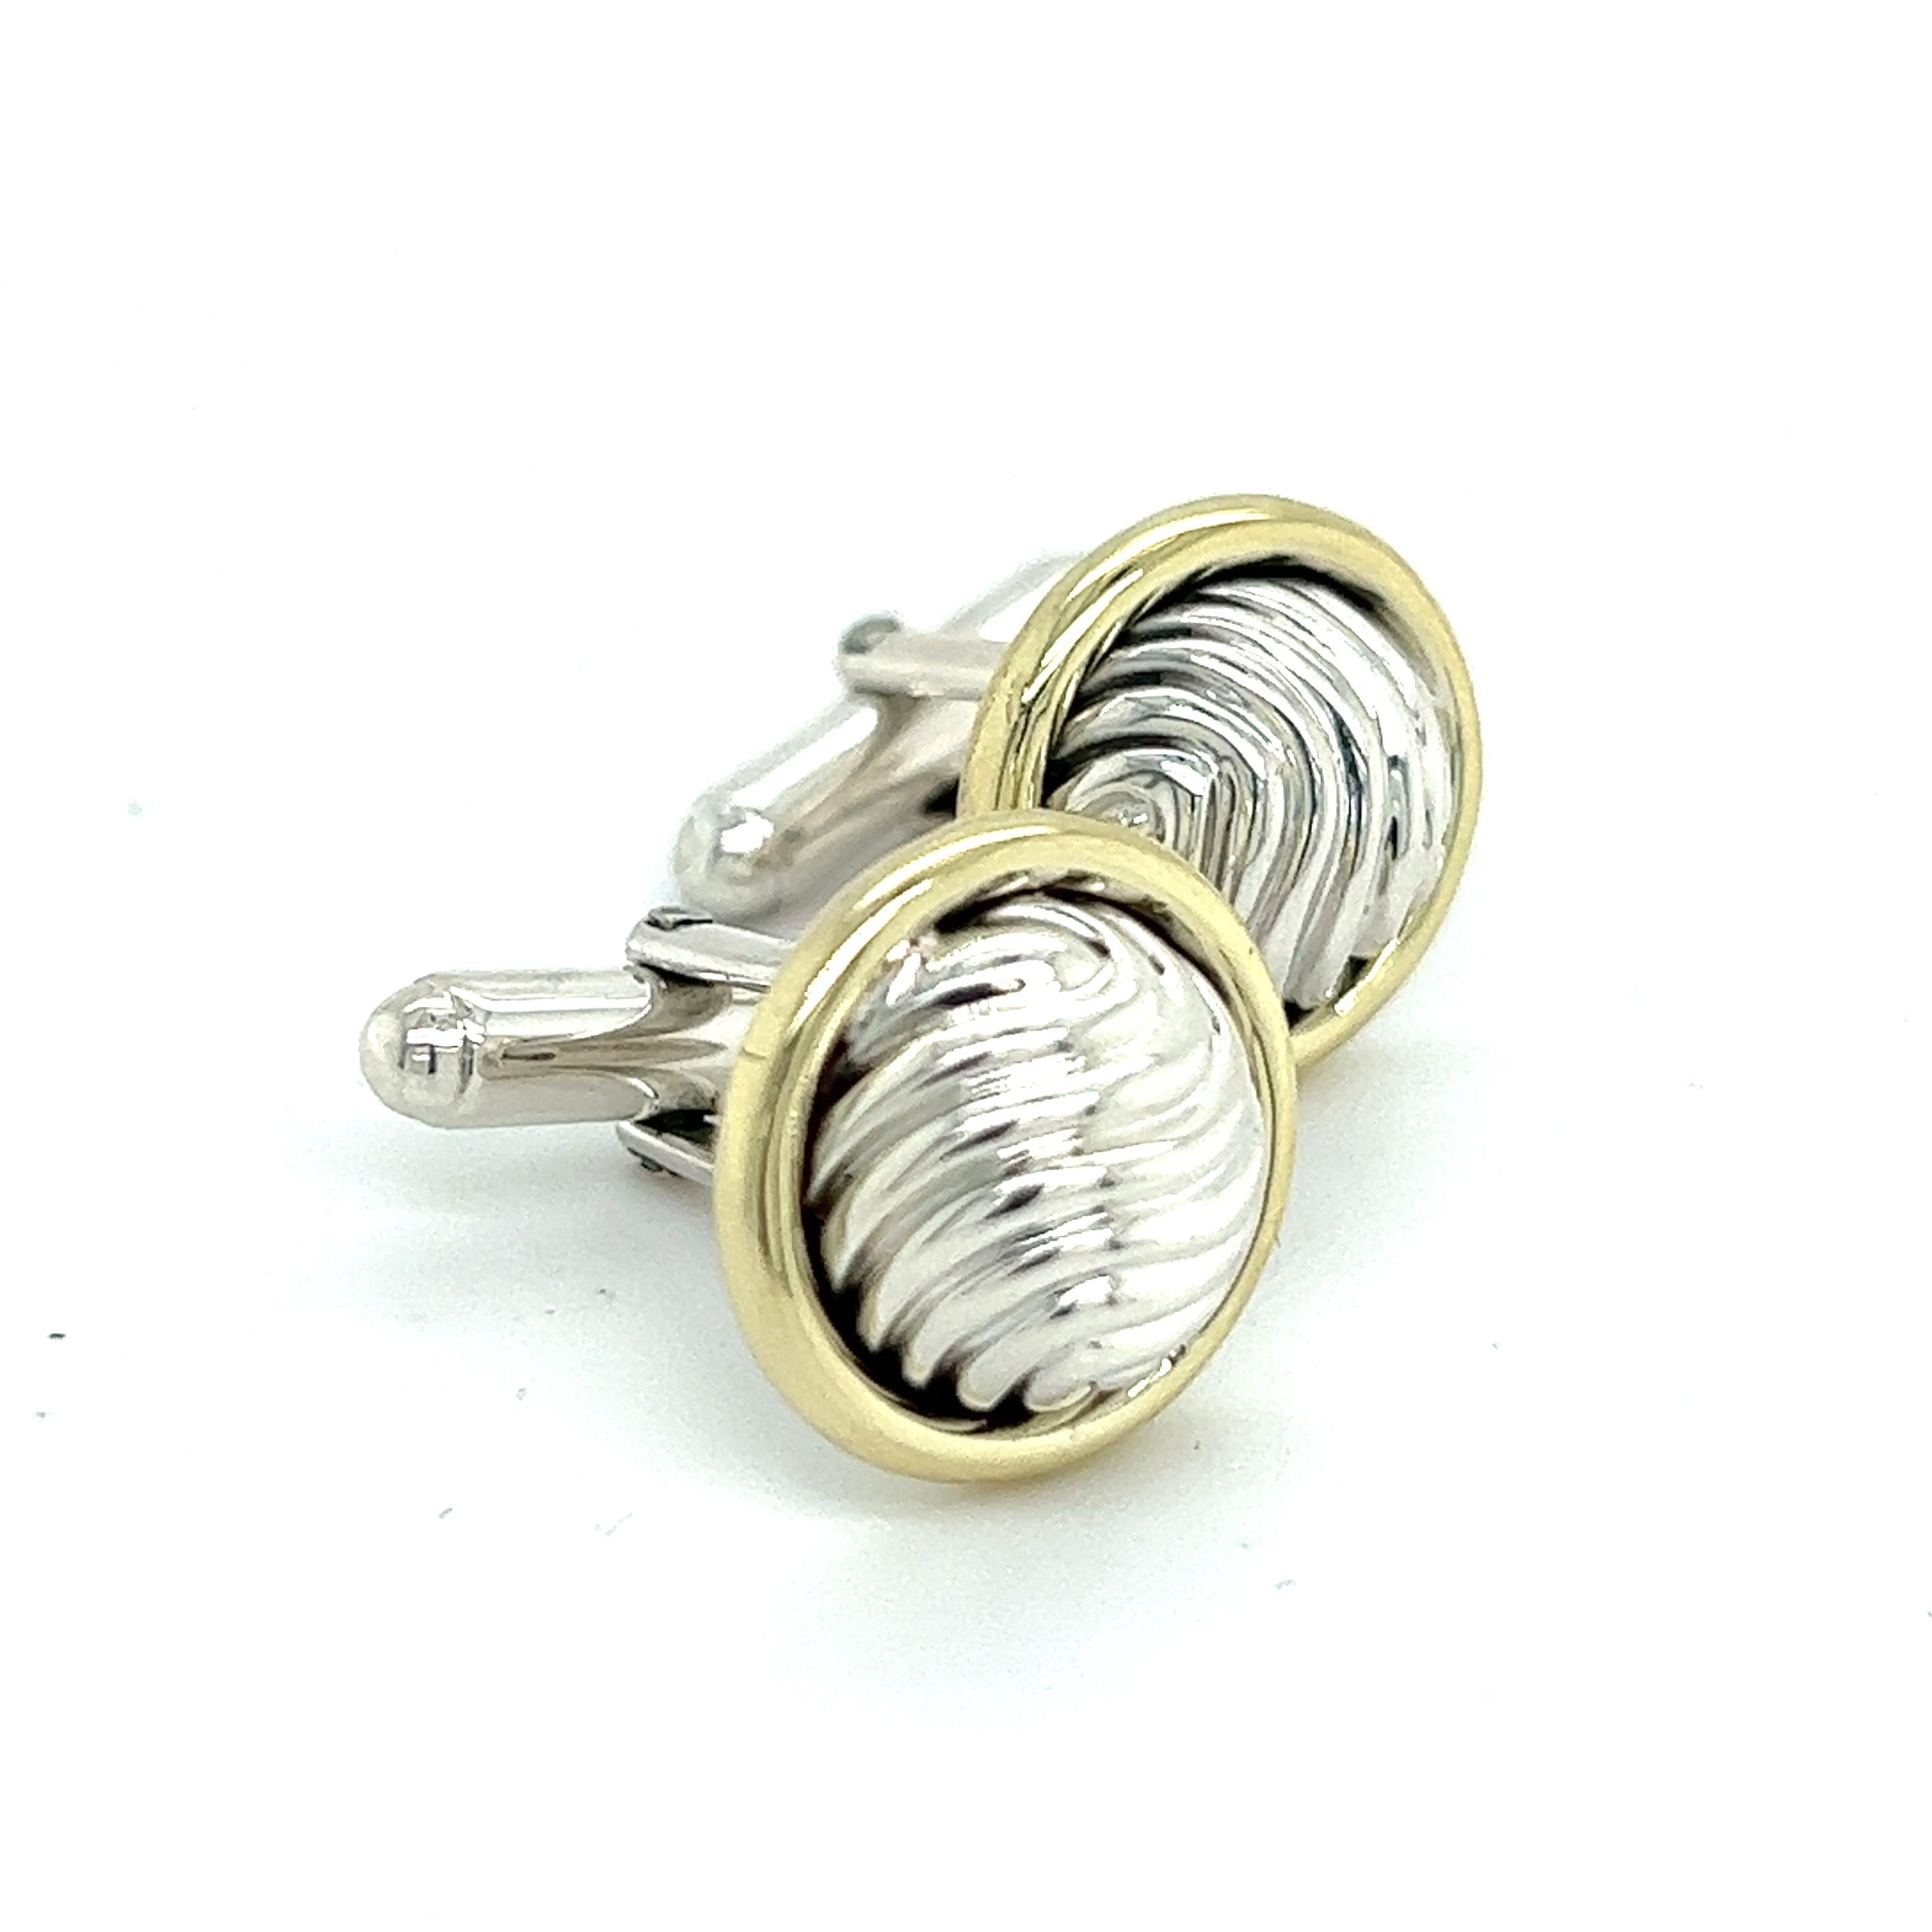 David Yurman Estate Cufflinks Sterling Silver + 14k Gold DY133

Retail: $999.00

TRUSTED SELLER SINCE 2002

PLEASE SEE OUR HUNDREDS OF POSITIVE FEEDBACKS FROM OUR CLIENTS!!

FREE SHIPPING

Details
Grams: 14
Metal: Sterling Silver + 14k Gold

These